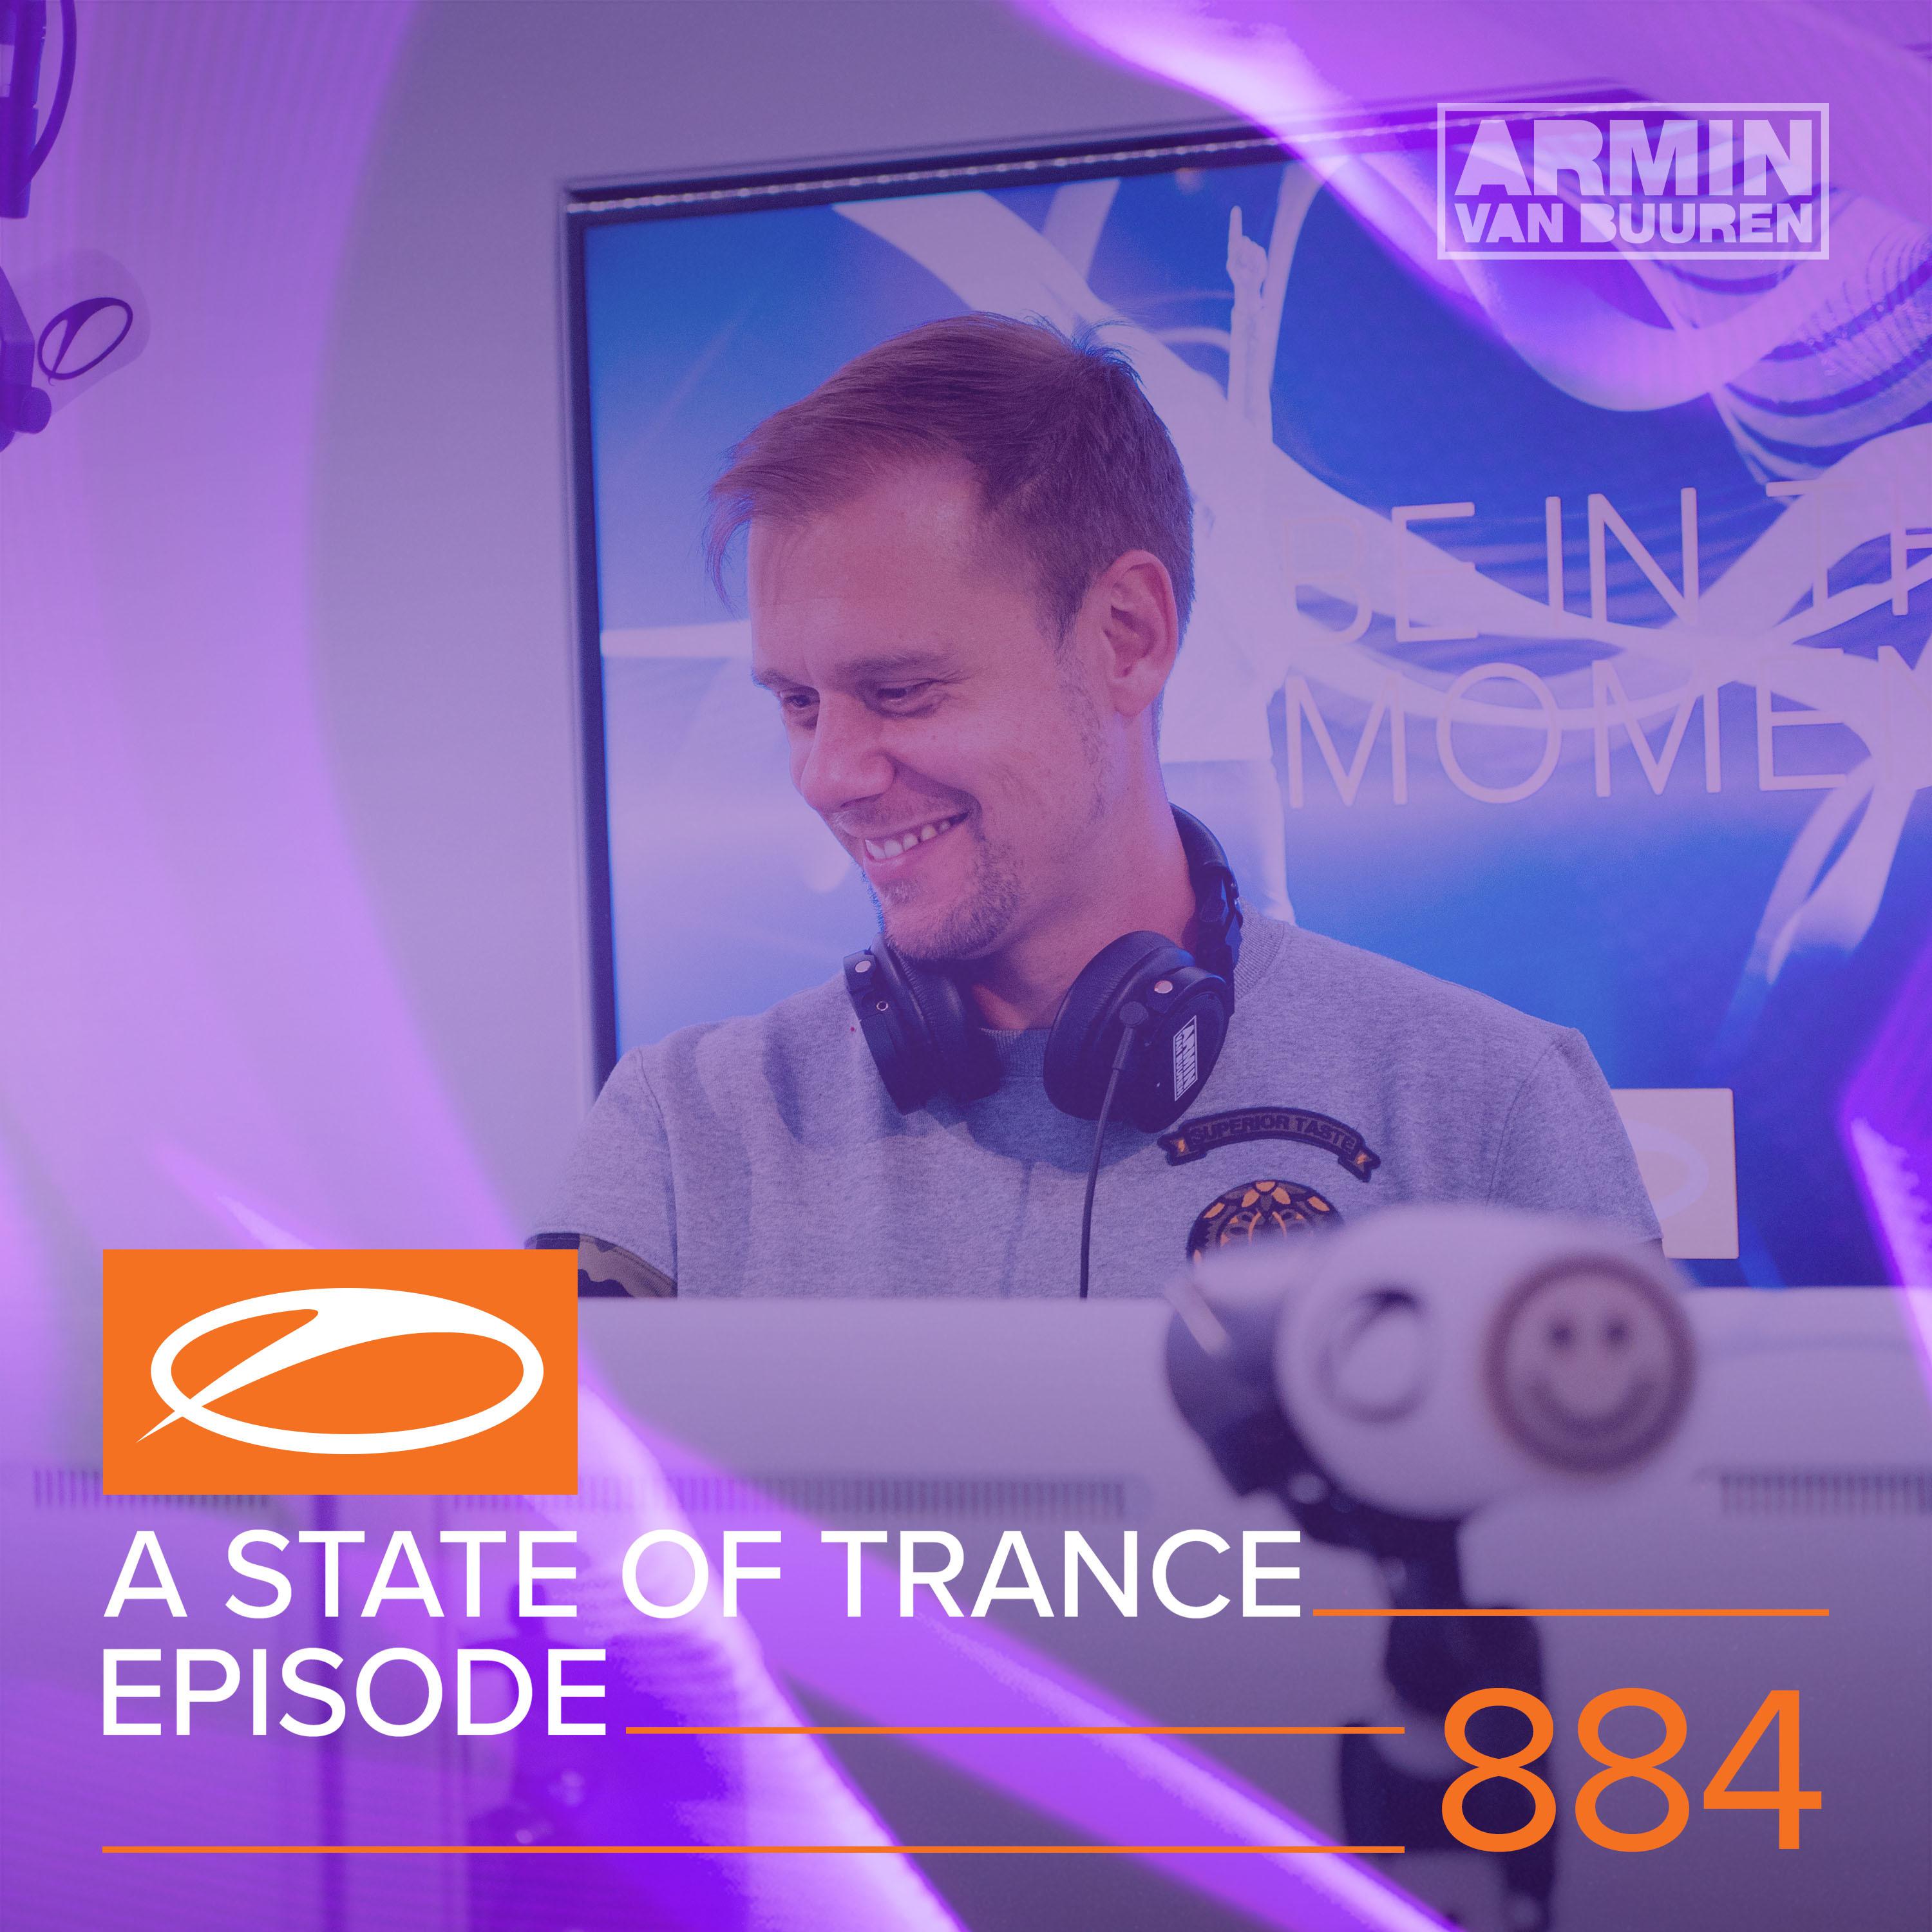 A State Of Trance (ASOT 884) (This Week's Service For Dreamers, Pt. 2)